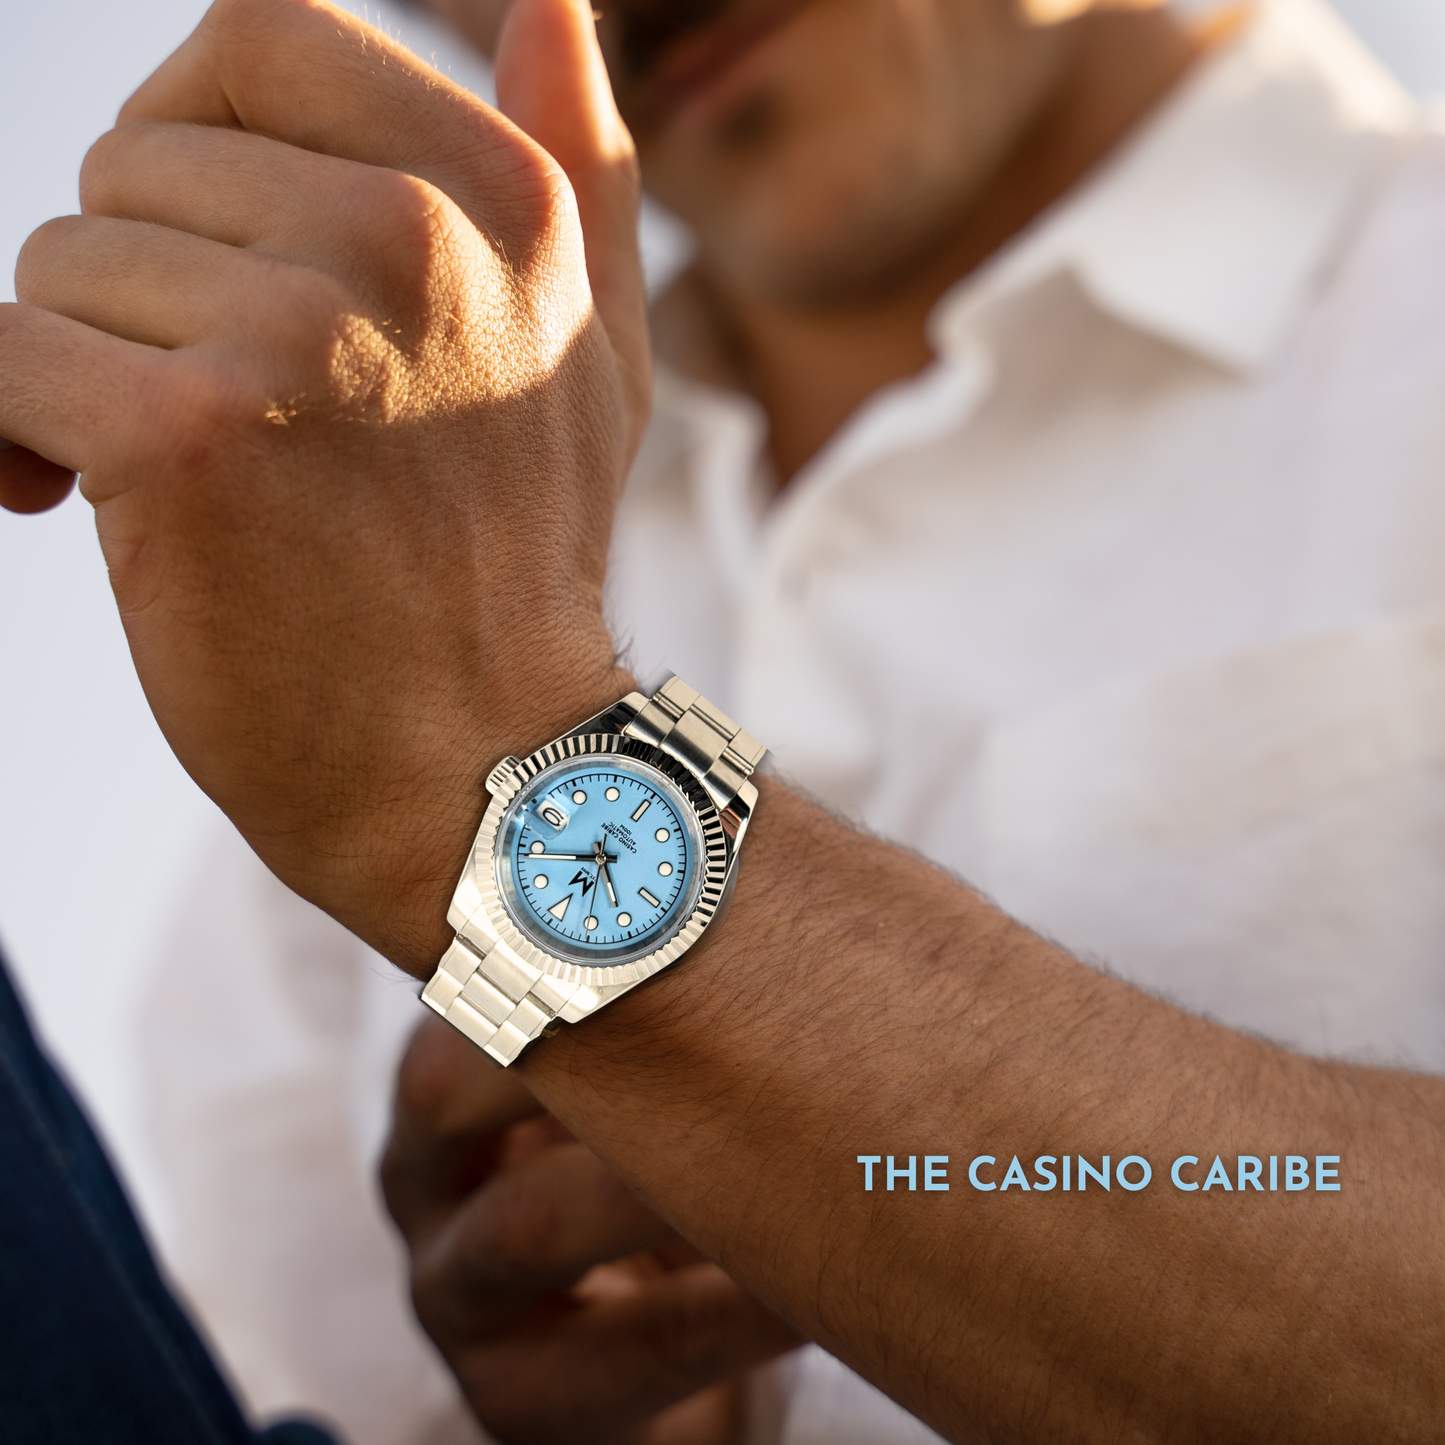 Casino Watch | The Casino Caribe Diver Luxury Timepiece by Monterey Watch Co